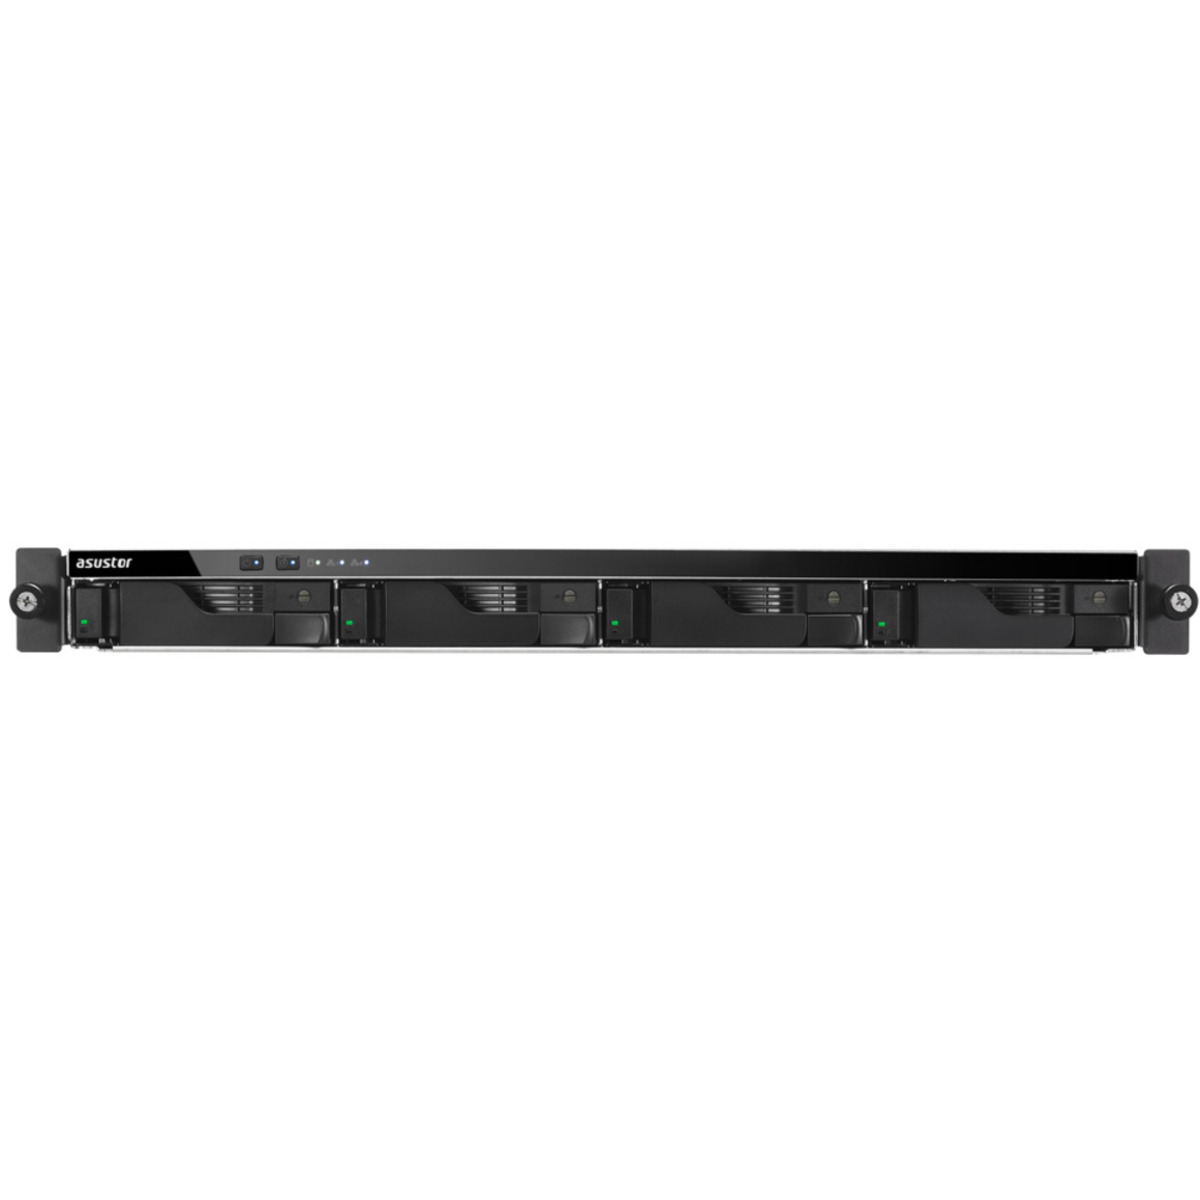 ASUSTOR LOCKERSTOR 4RD AS6504RD 6tb 4-Bay RackMount Multimedia / Power User / Business NAS - Network Attached Storage Device 3x2tb Samsung 870 EVO MZ-77E2T0BAM 2.5 560/530MB/s SATA 6Gb/s SSD CONSUMER Class Drives Installed - Burn-In Tested - FREE RAM UPGRADE LOCKERSTOR 4RD AS6504RD